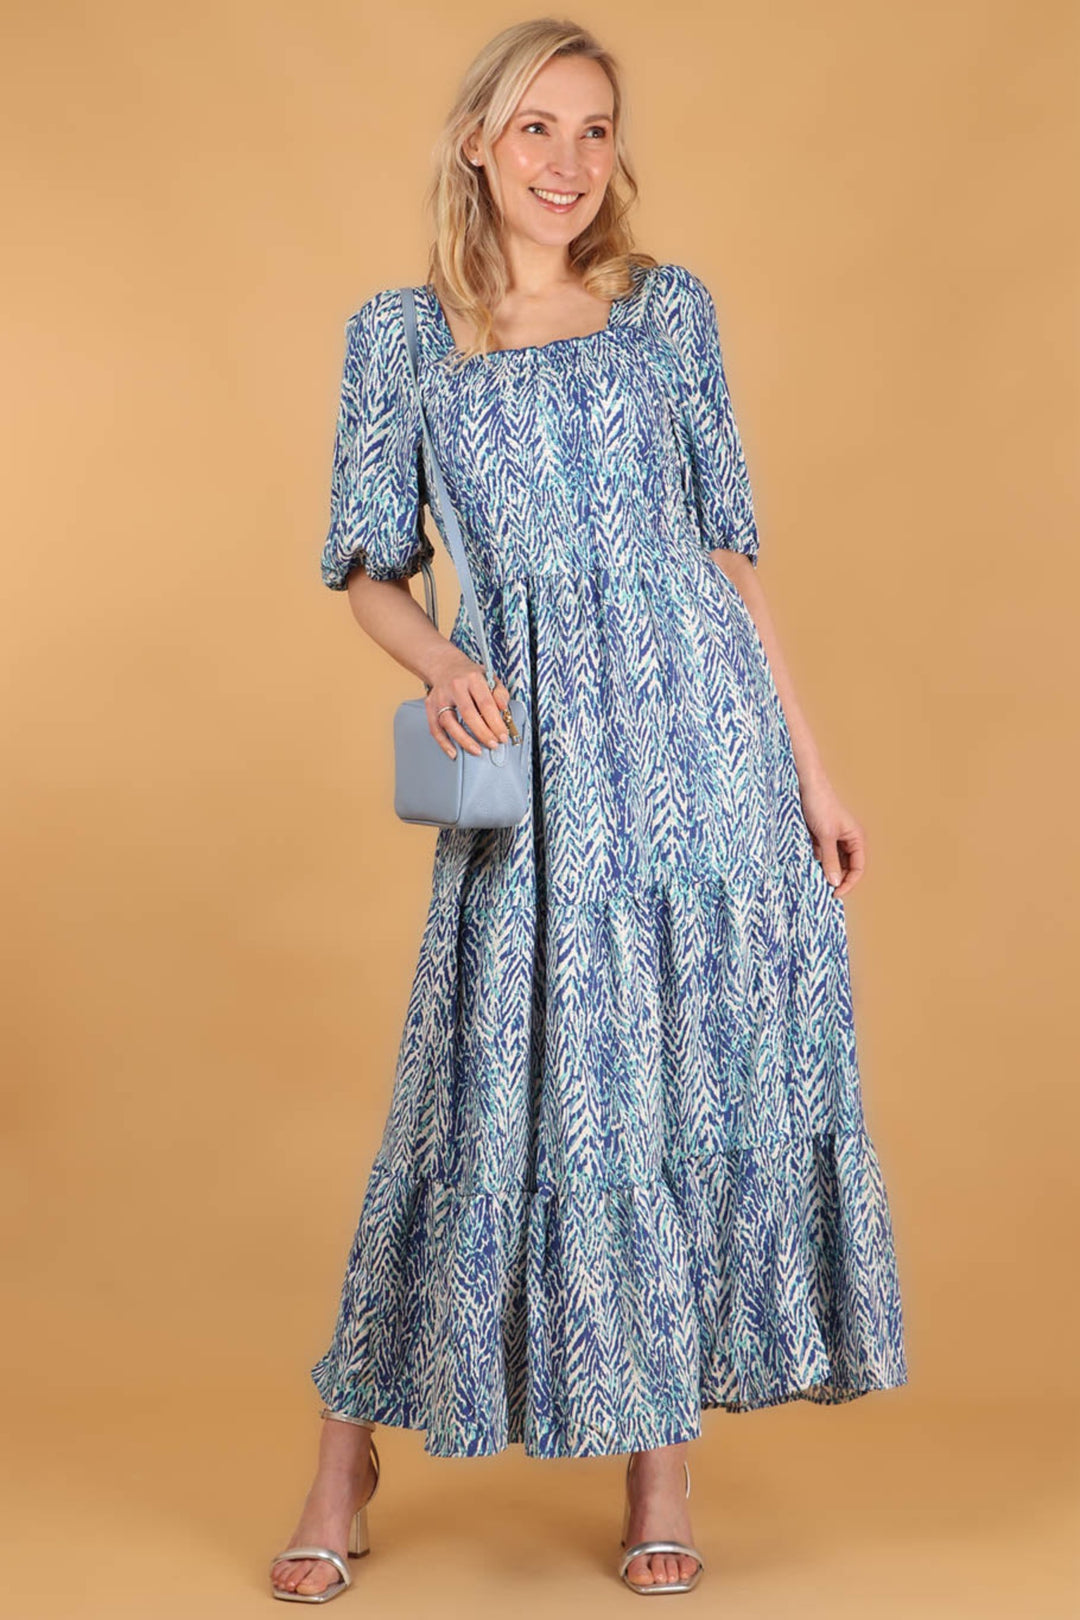 model wearing a blue chevron print square neck shirred maxi dress accessorised with a blue leather handbag